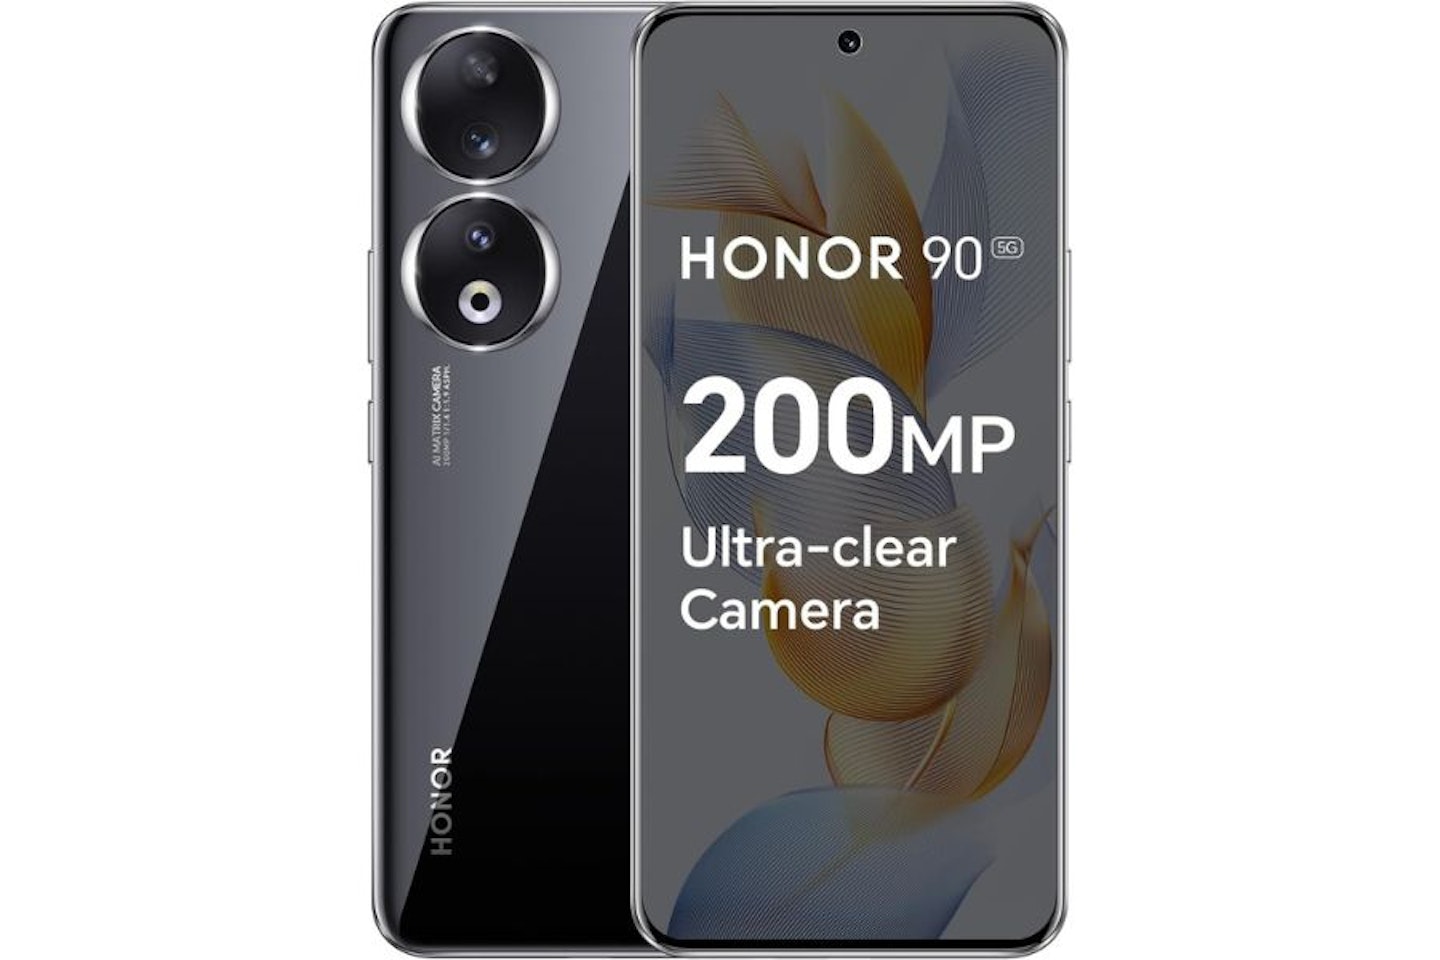 Honor 90 product card